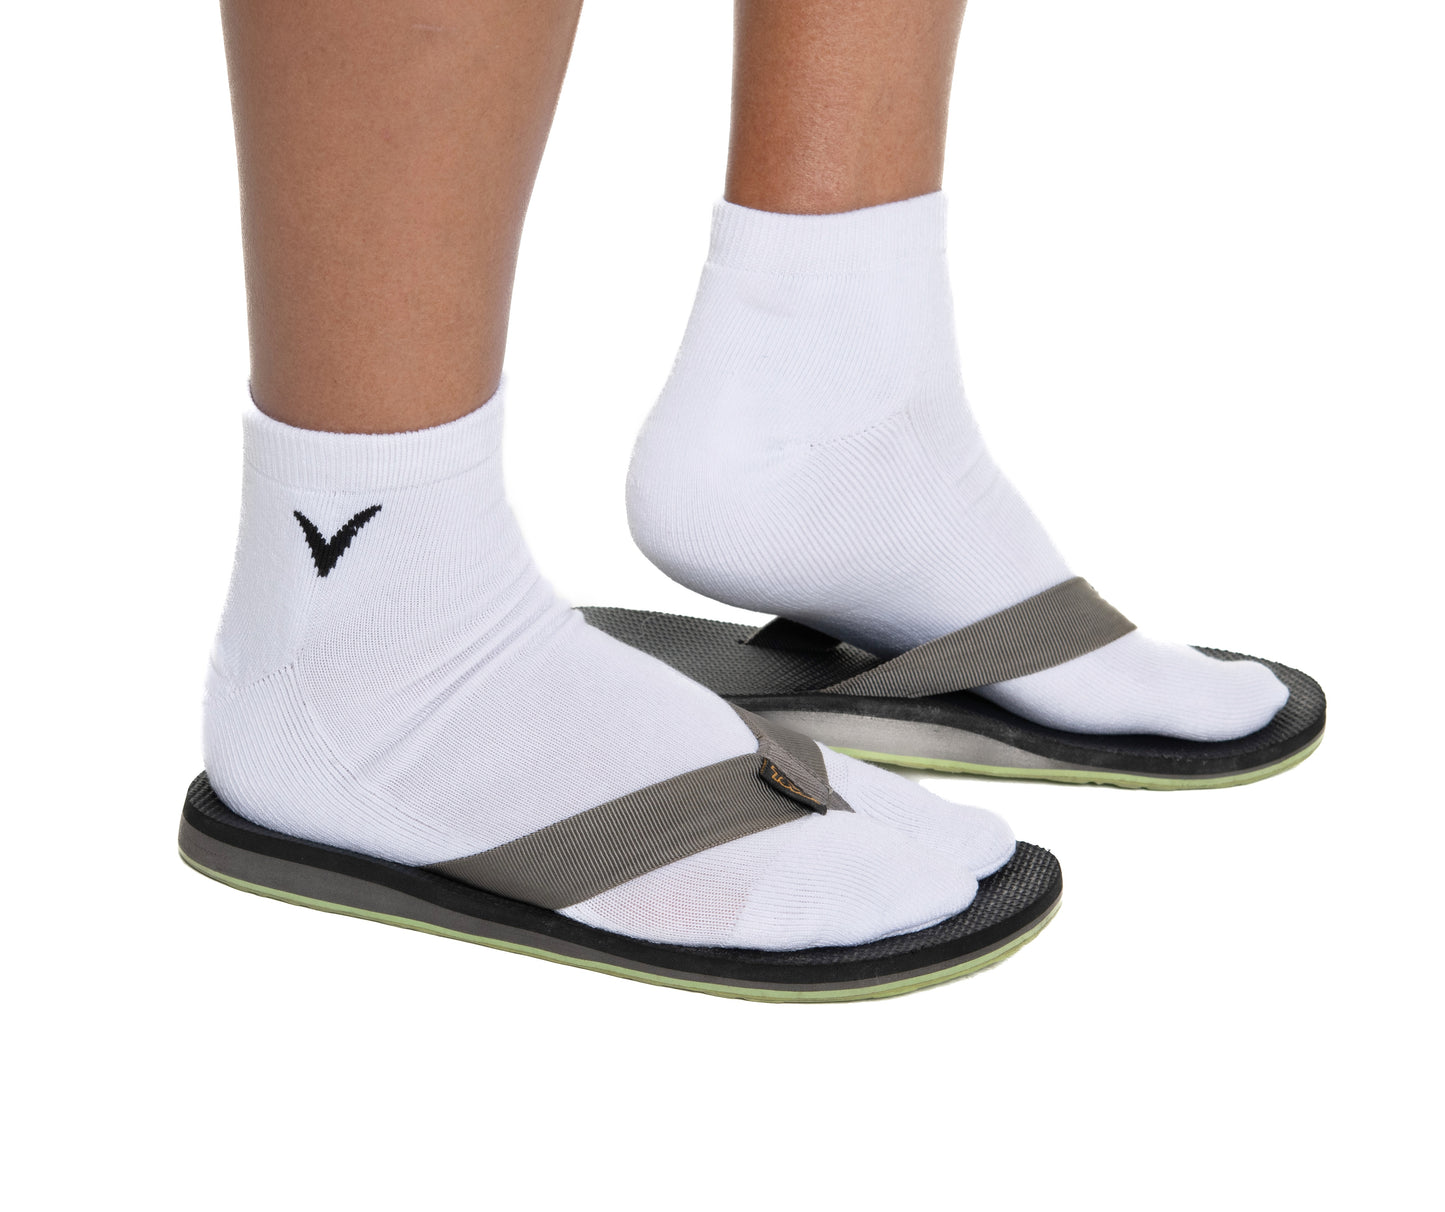 Thicker V-Toe Athletic or Casual White Flip-Flop Tabi Socks Cotton Blend Comfortable Stylish - Ankle Socks